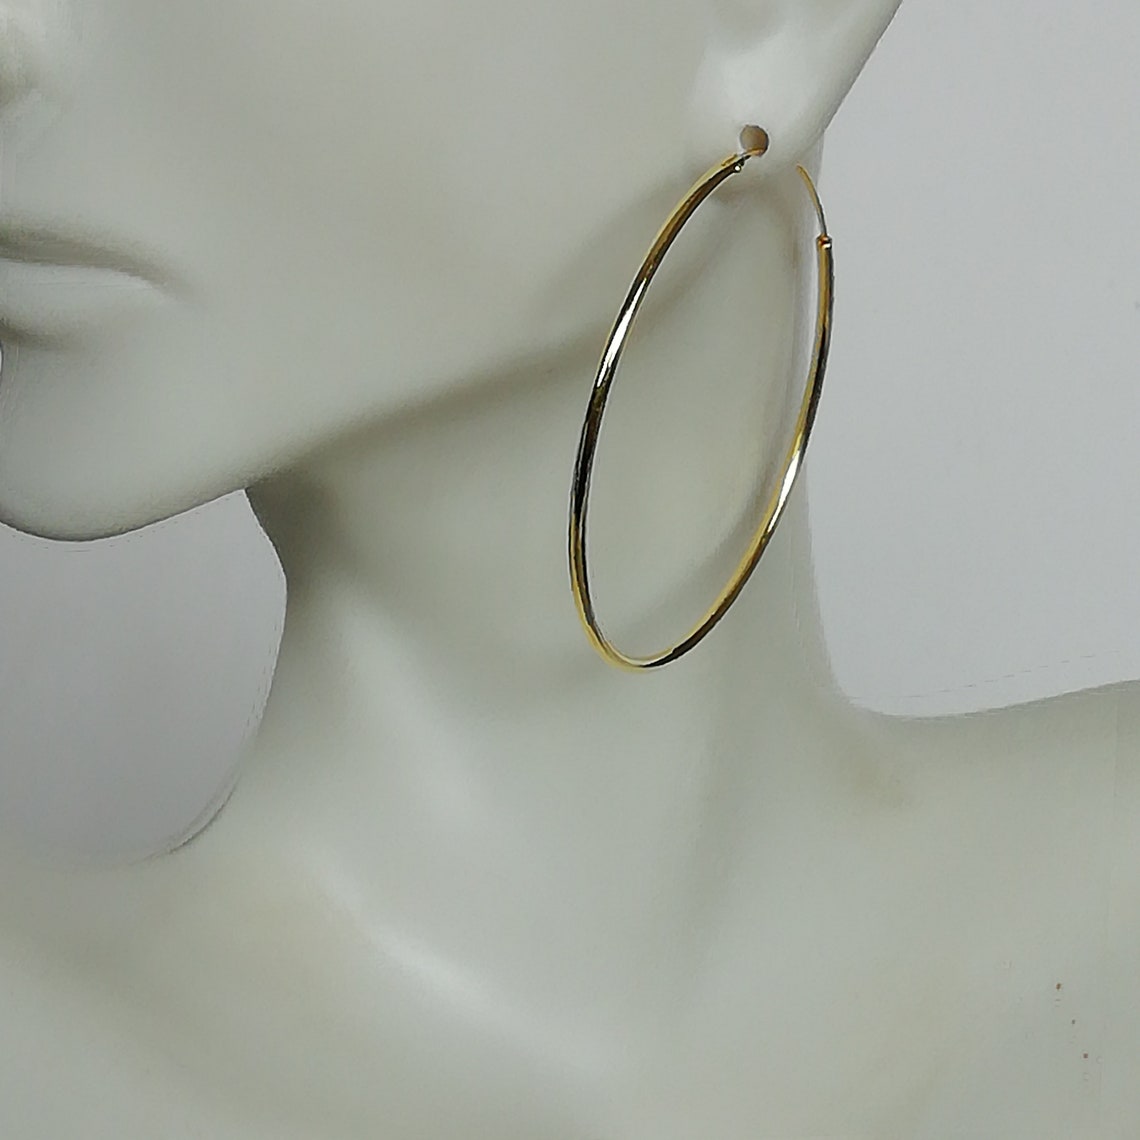 Large gold hoop earrings Gold hoops 45 mm gold plated | Etsy